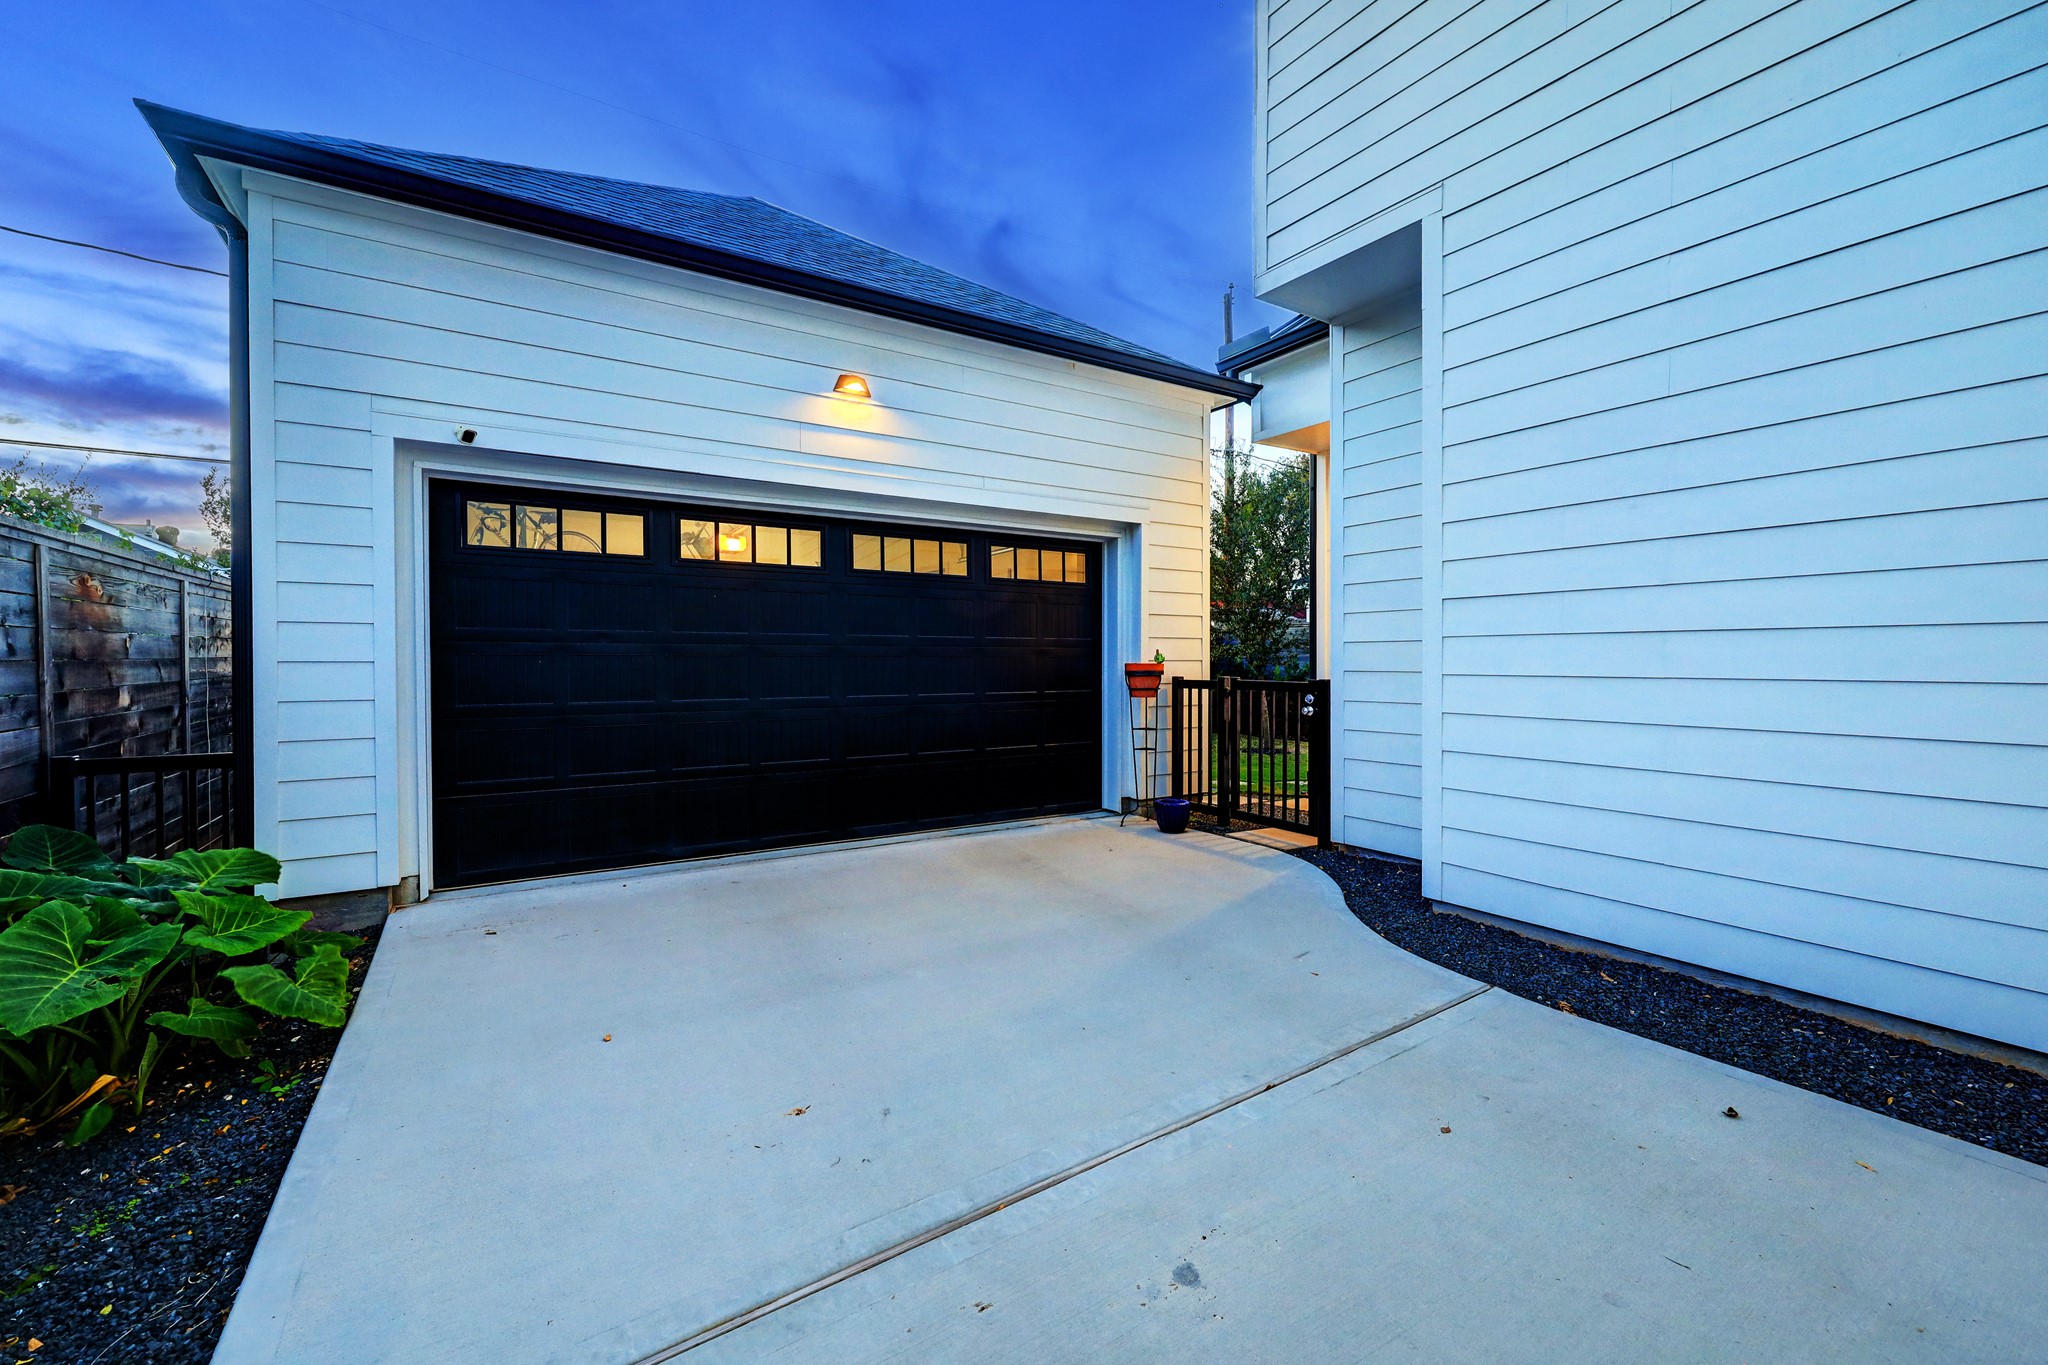 The 2-car garage features epoxy floors and the fully gated driveway does double duty, perfect for additional parking or expanded outdoor entertaining space.